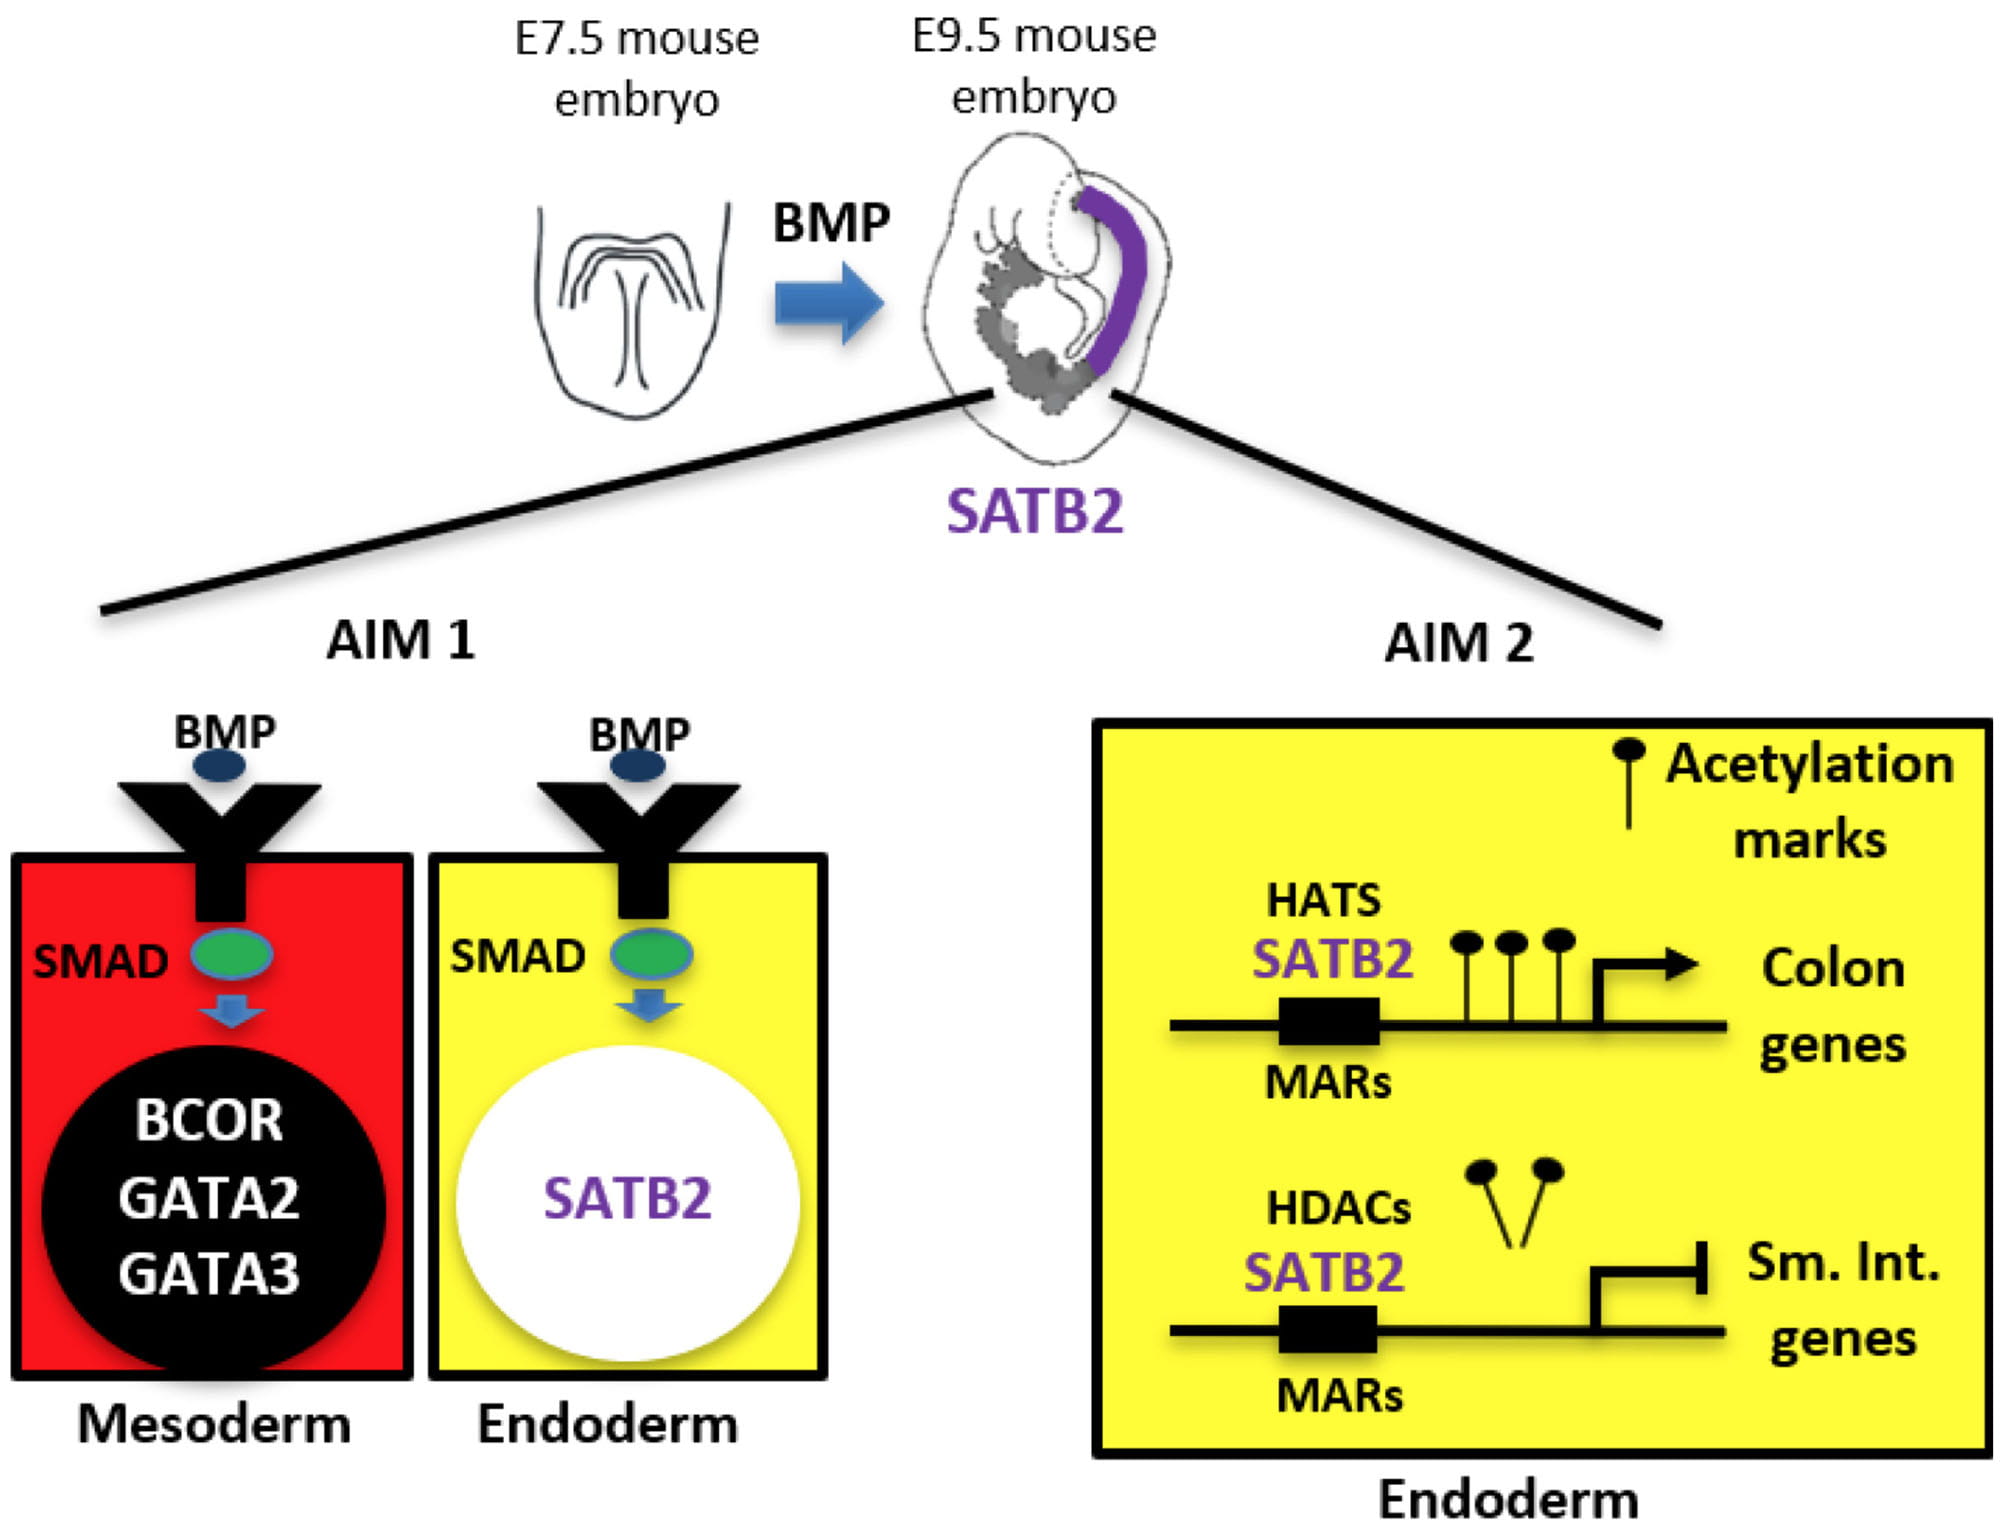 Working hypothesis for research in the Munera lab investigating the role of SMAD1 and SATB2 in colon patterning